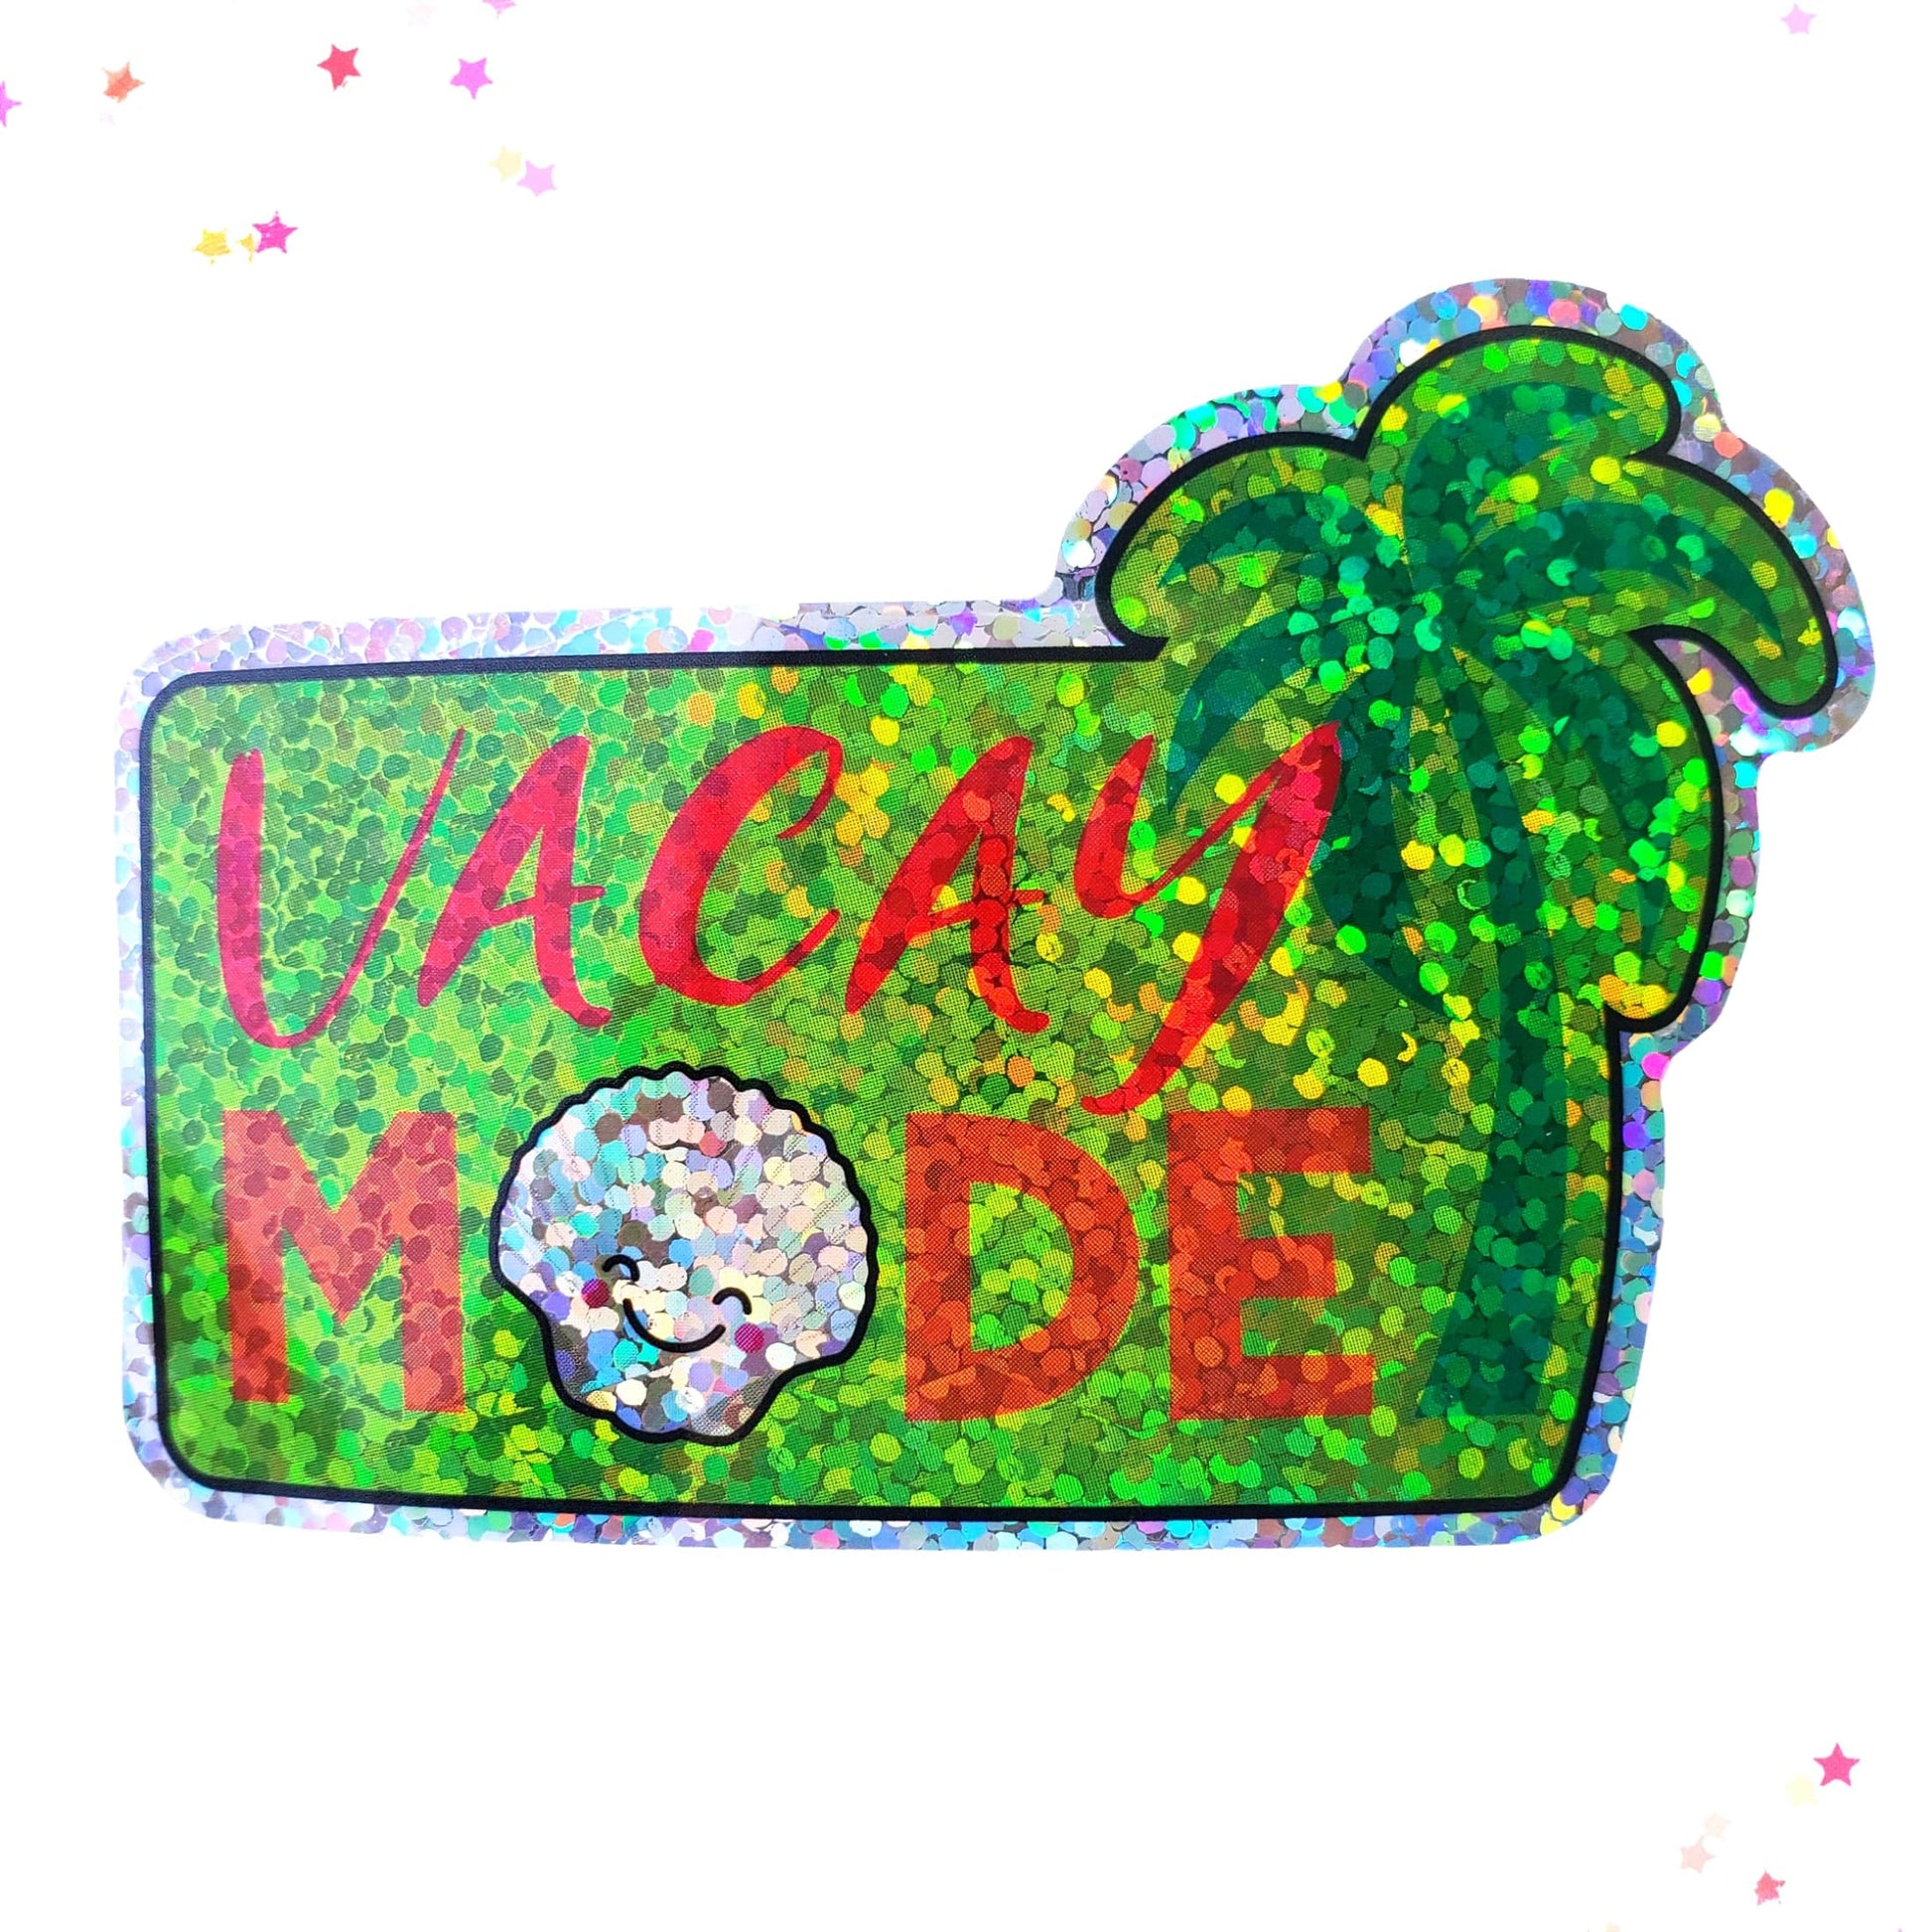 Premium Sticker - Sparkly Holographic Glitter Vacay Mode from Confetti Kitty, Only 2.0